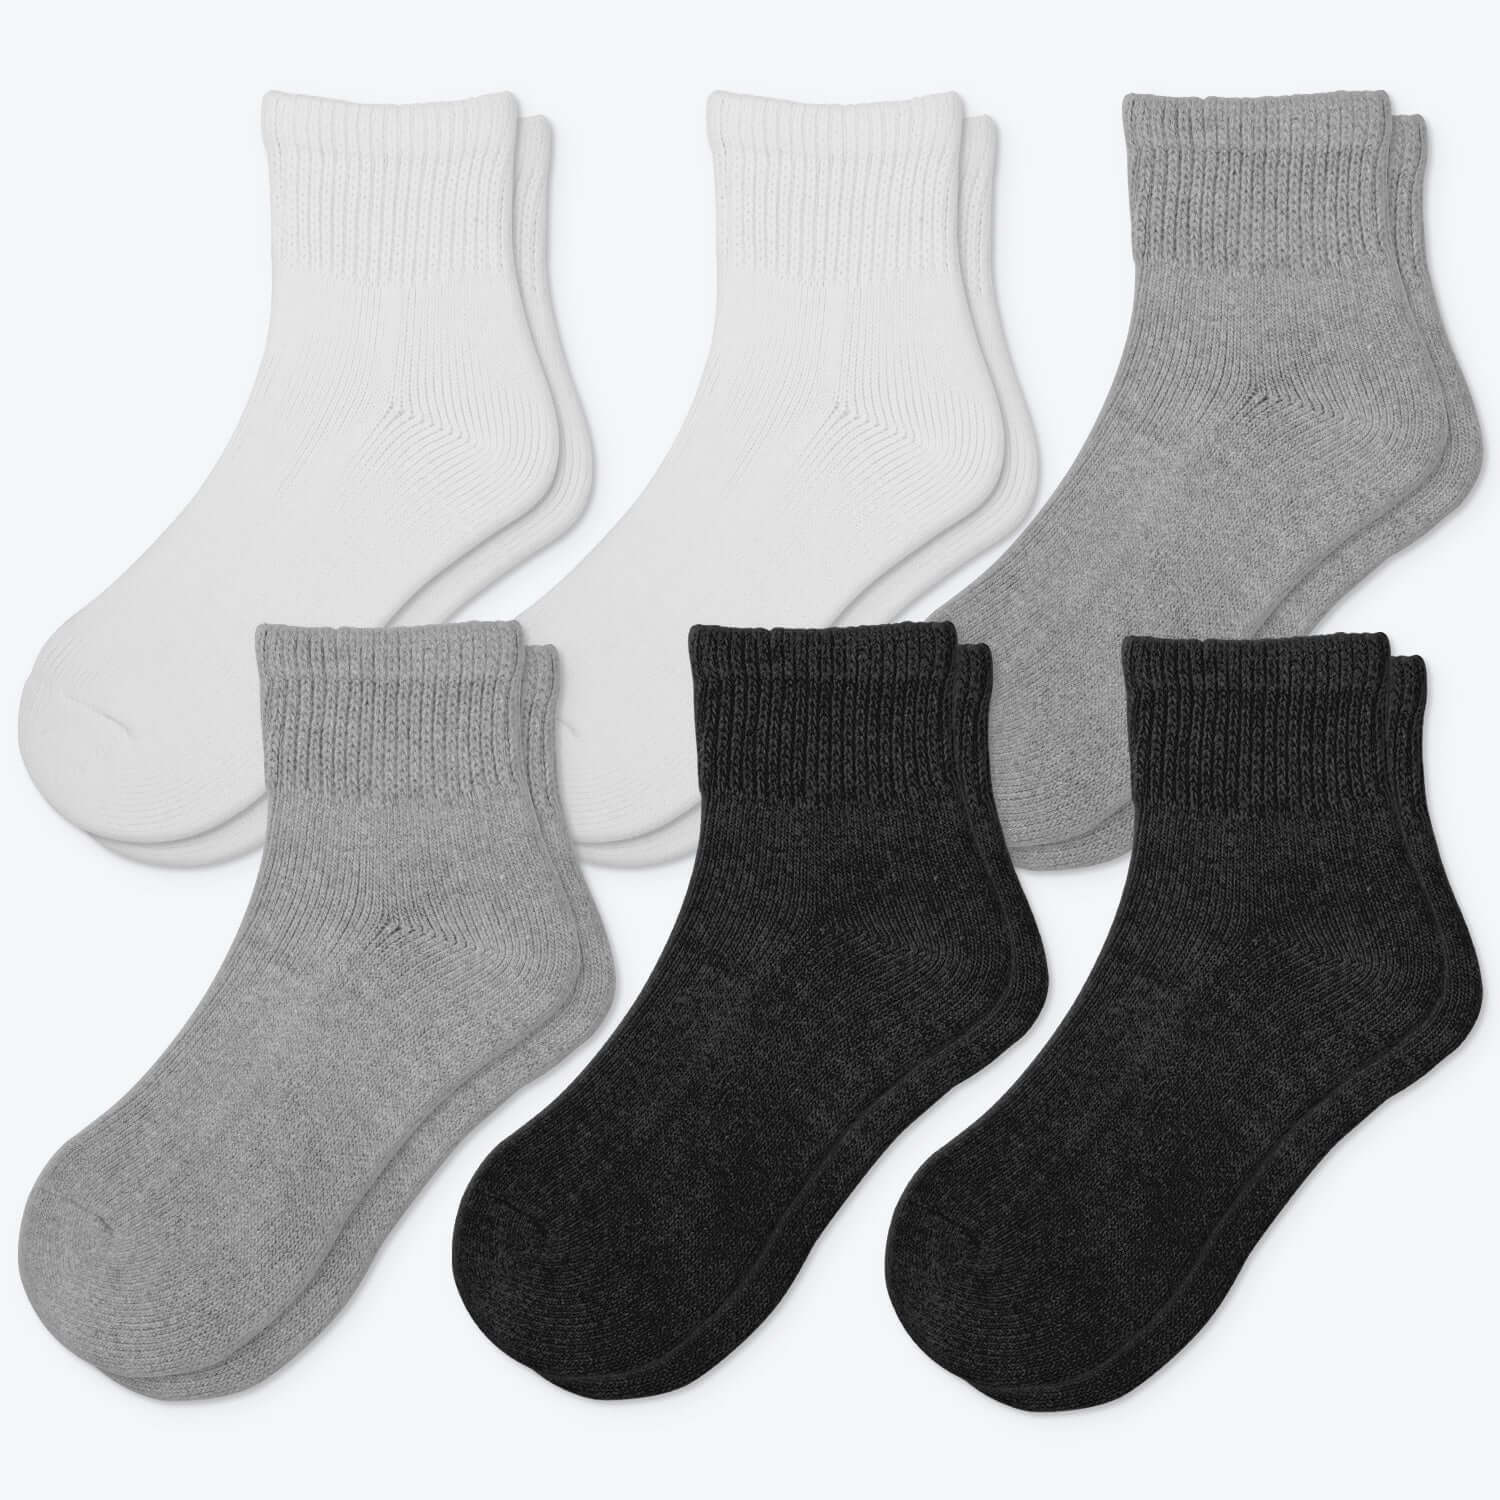 Extra wide diabetic ankle socks, warm & thick cushion sole, 6 pairs - md-diab